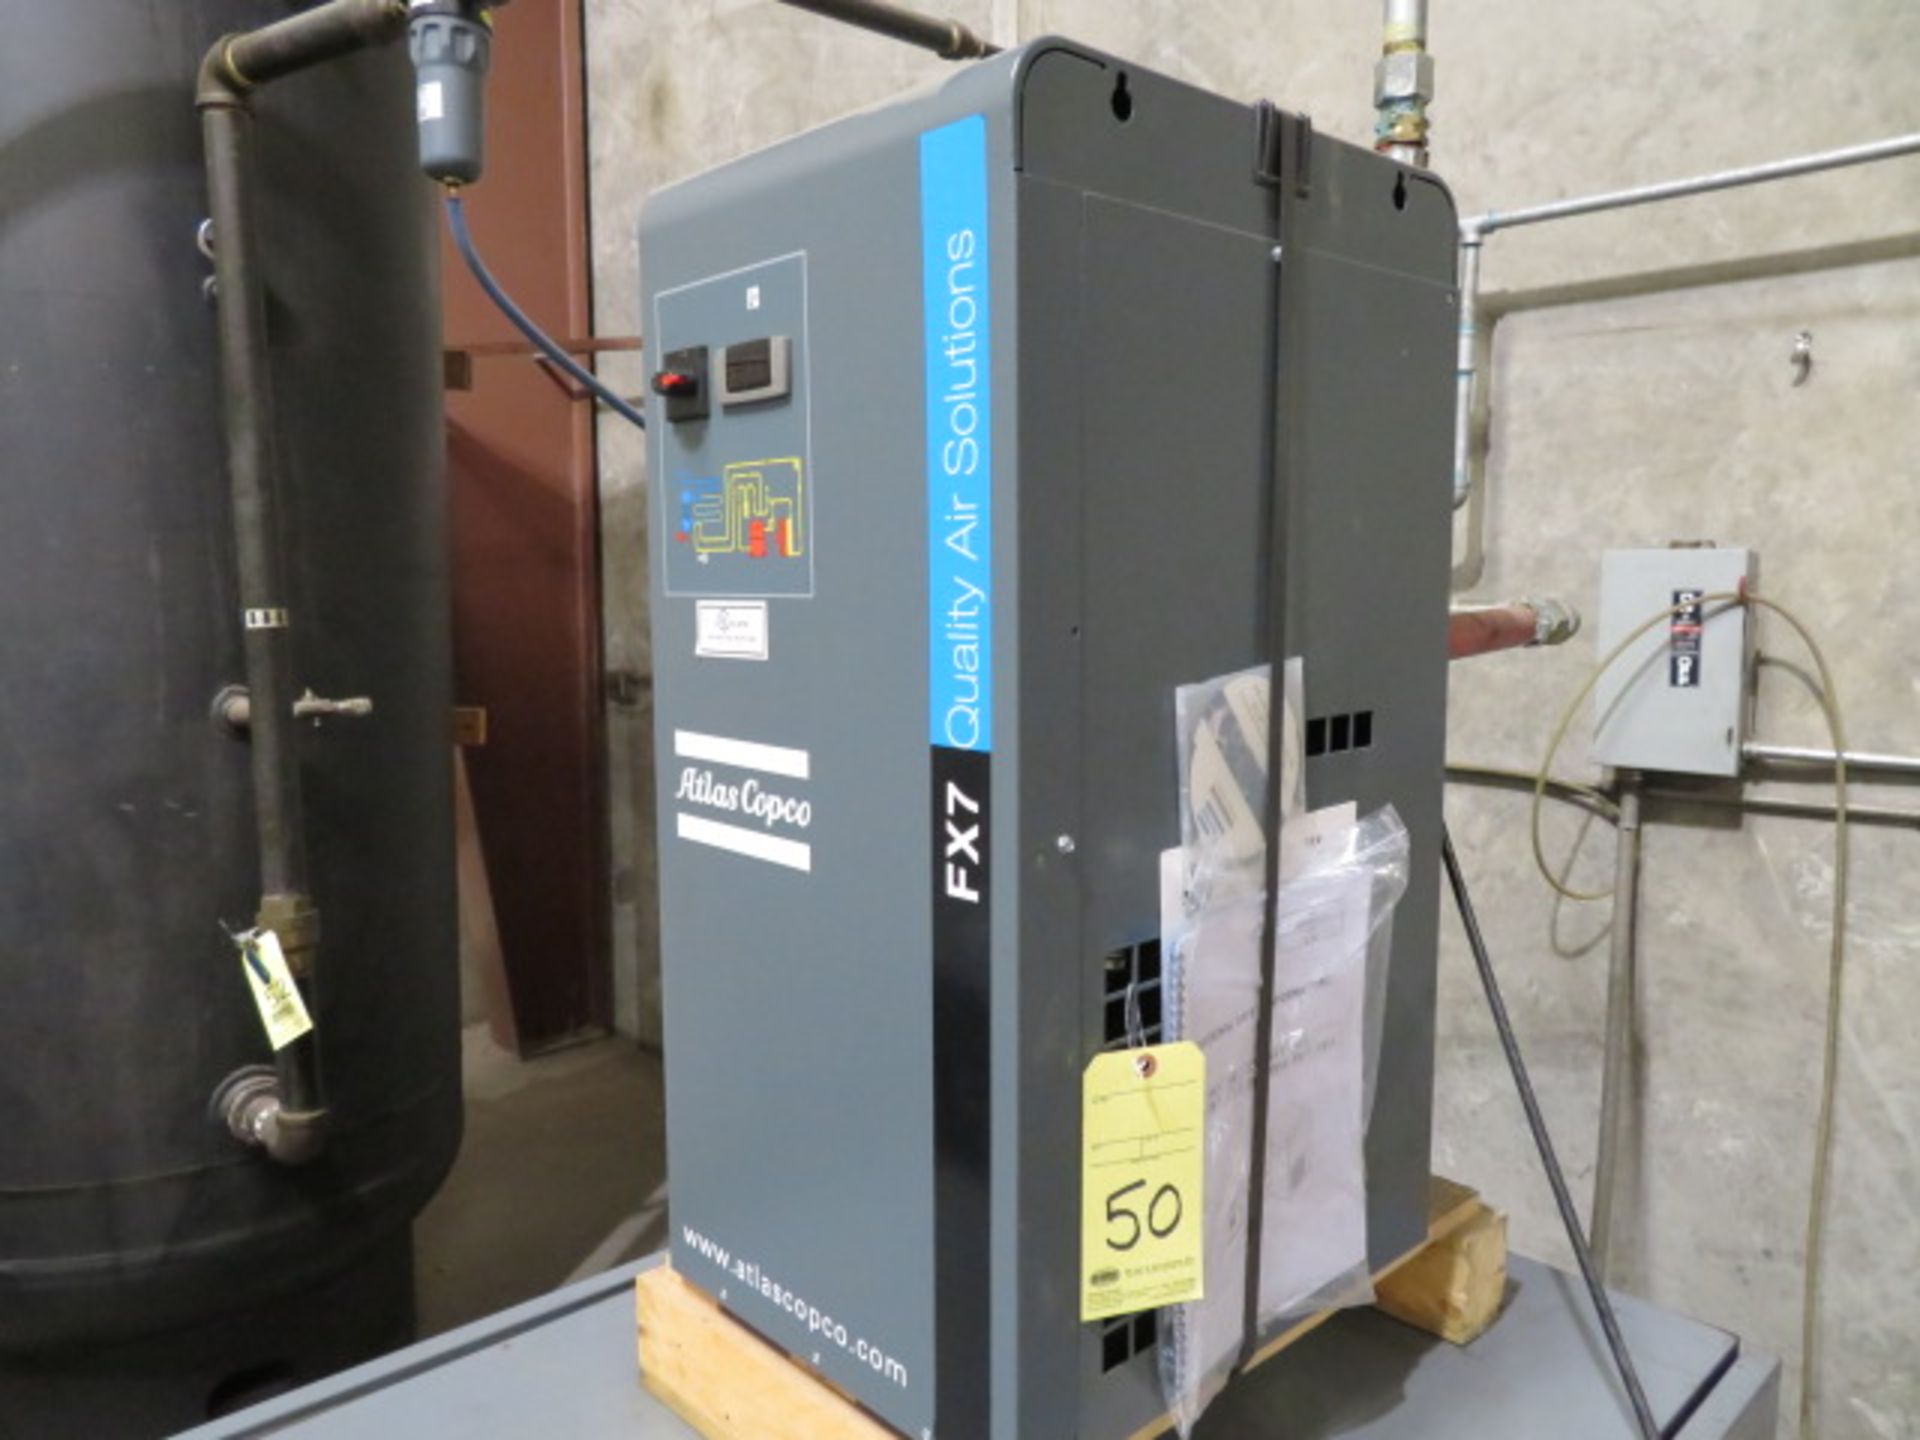 REFRIGERATED AIR DRYER, ATLAS COPCO MDL. FX7 NEW 2019 - Image 2 of 3